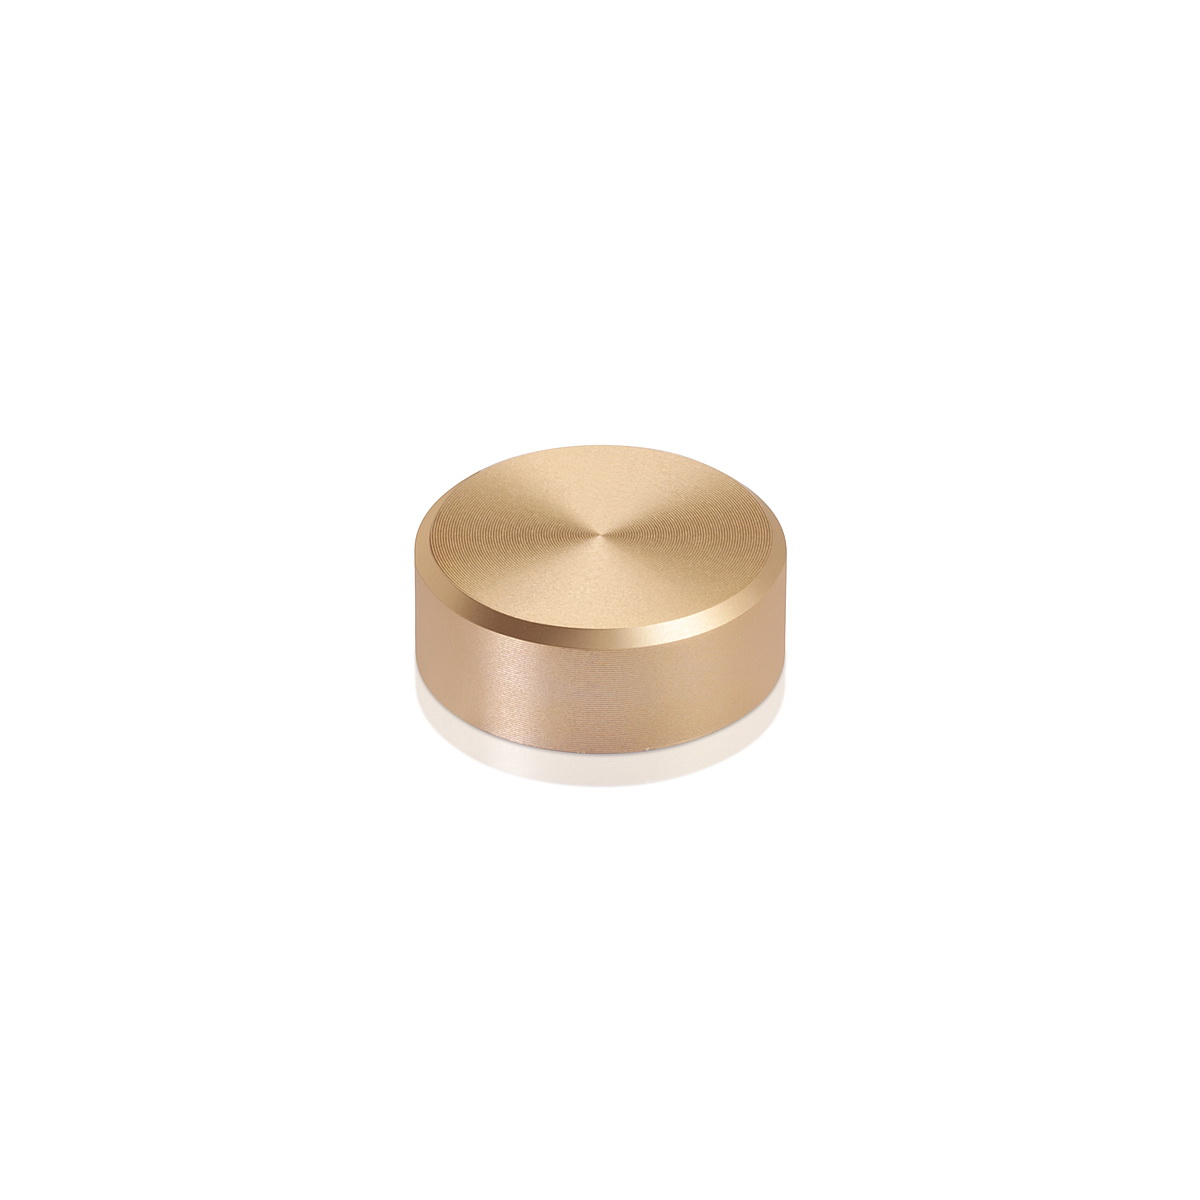 5/16-18 Threaded Caps Diameter: 1'', Height 3/8'', Champagne Anodized Aluminum [Required Material Hole Size: 3/8'']